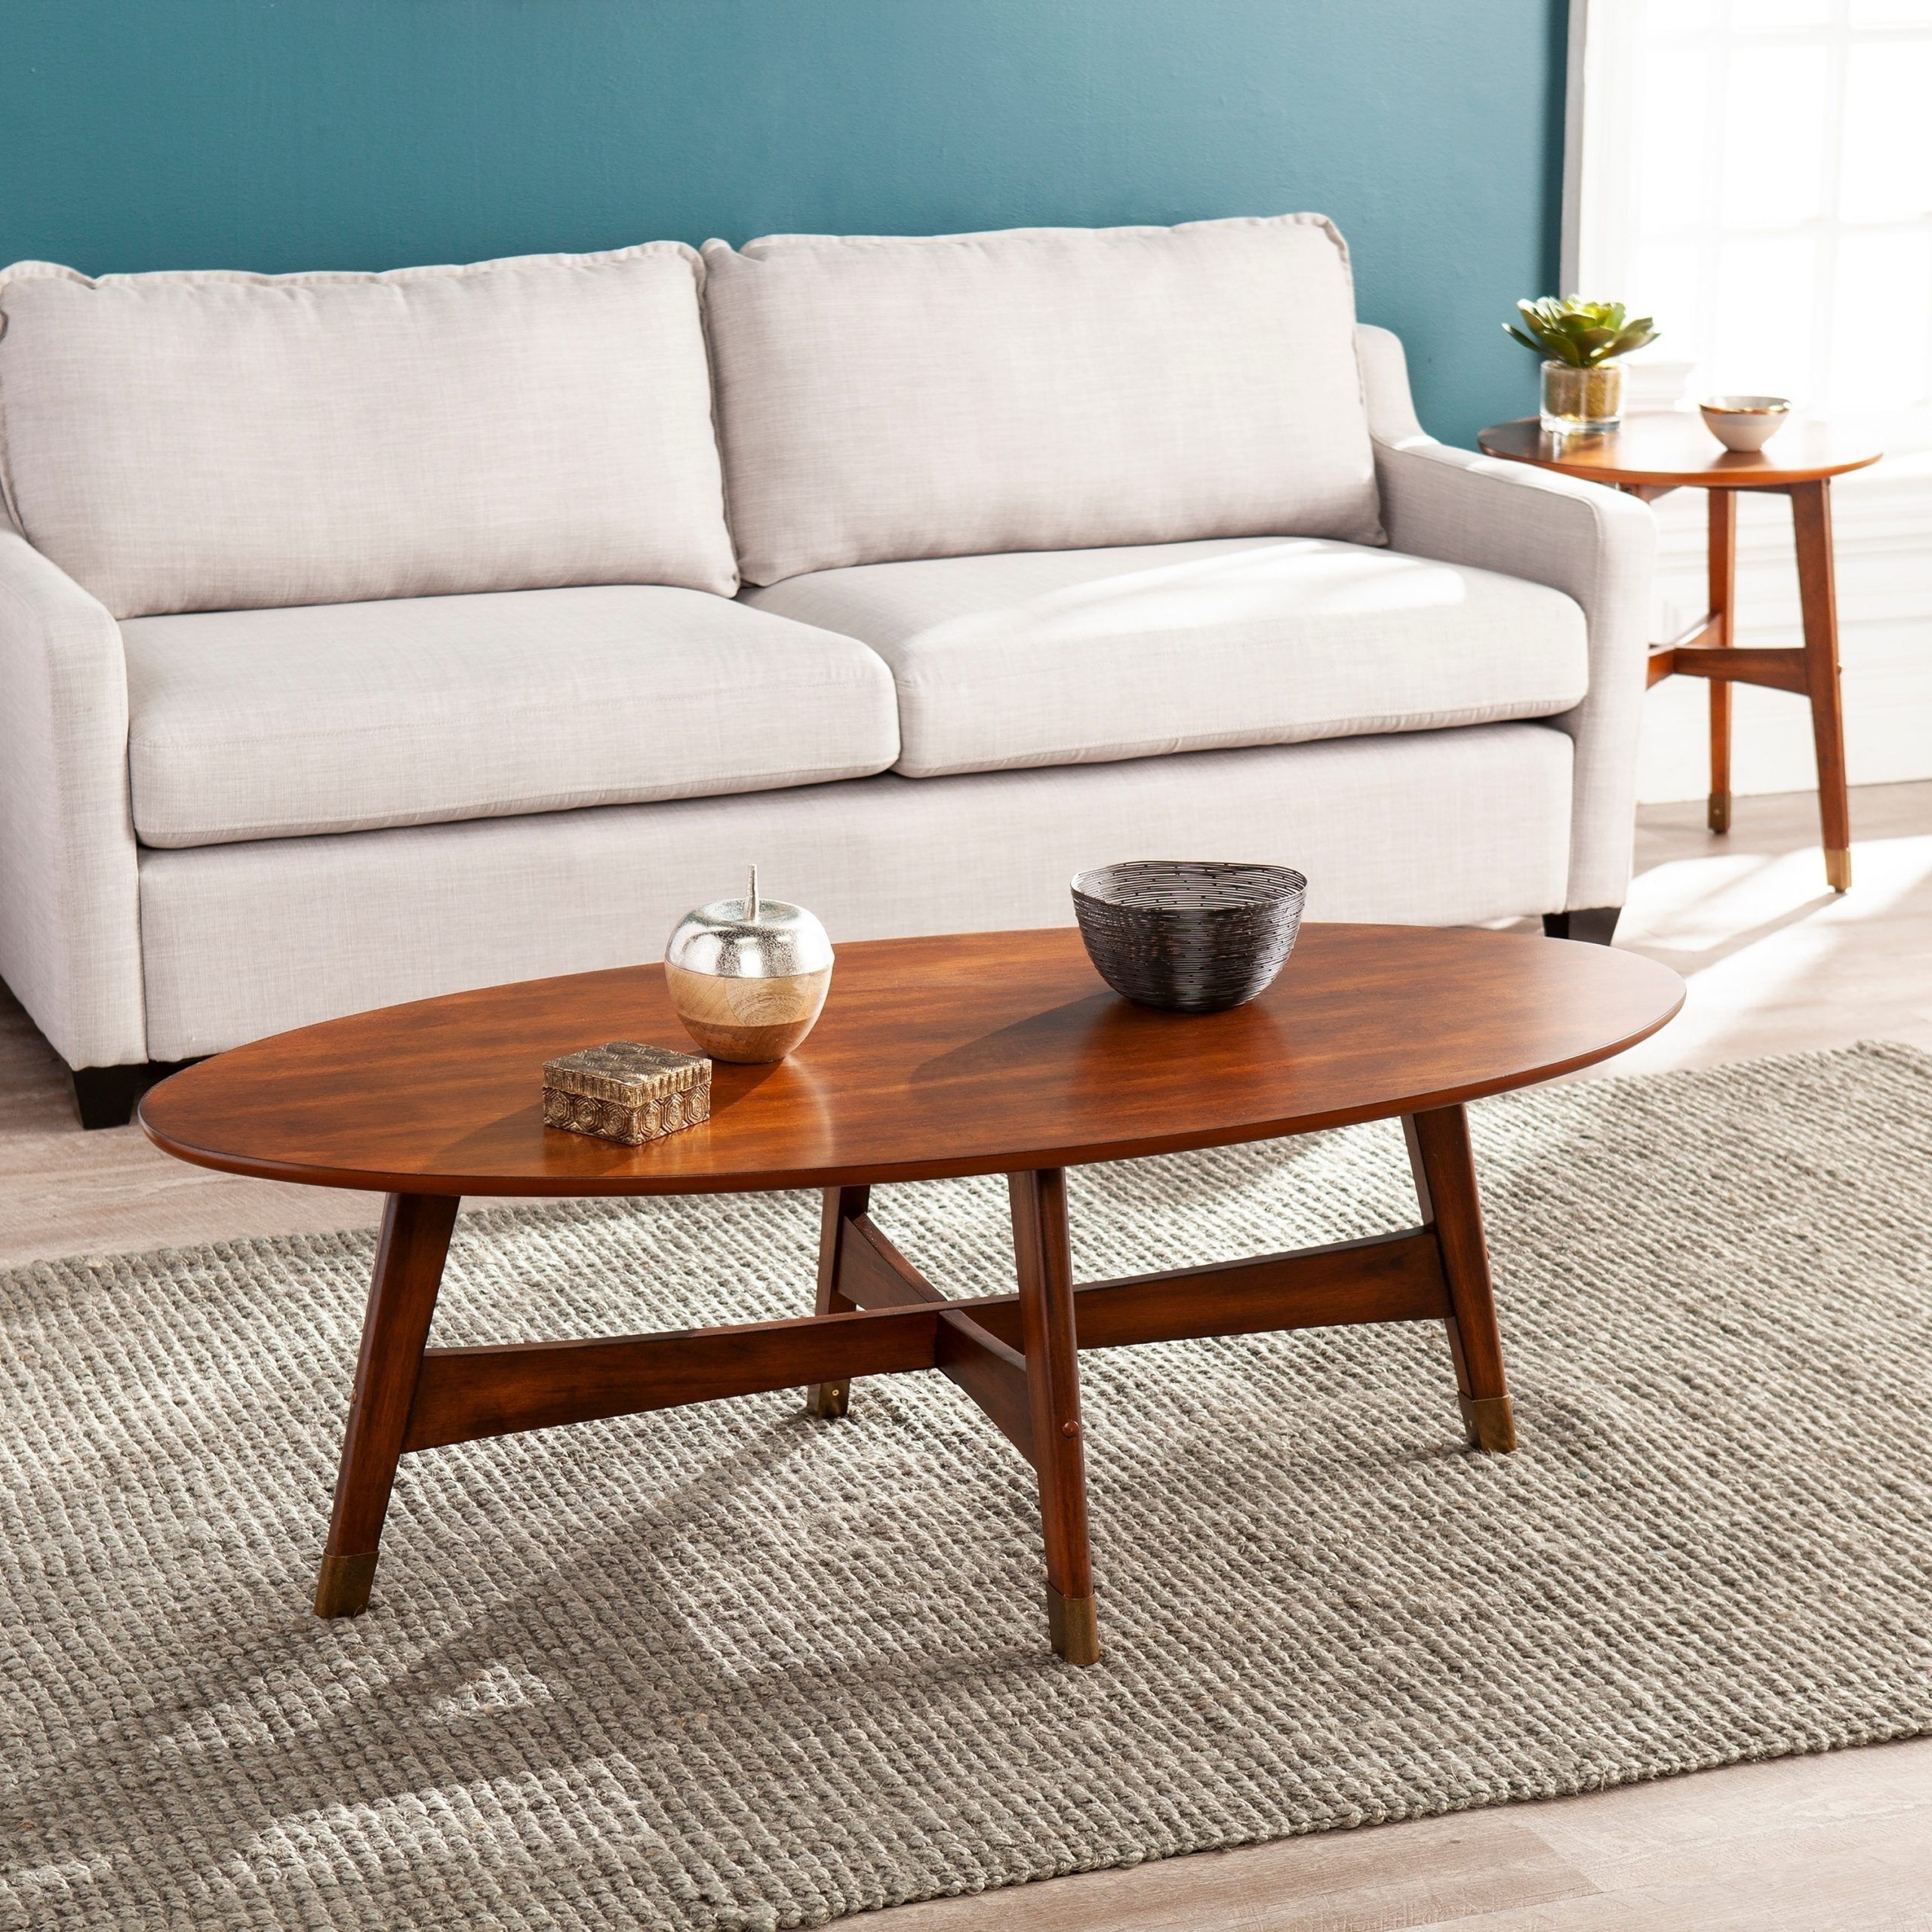 Most Recent Mid Century Coffee Tables Within Sei Furniture Ale Oval Mid Century Modern Coffee Table – Overstock –   (View 10 of 20)